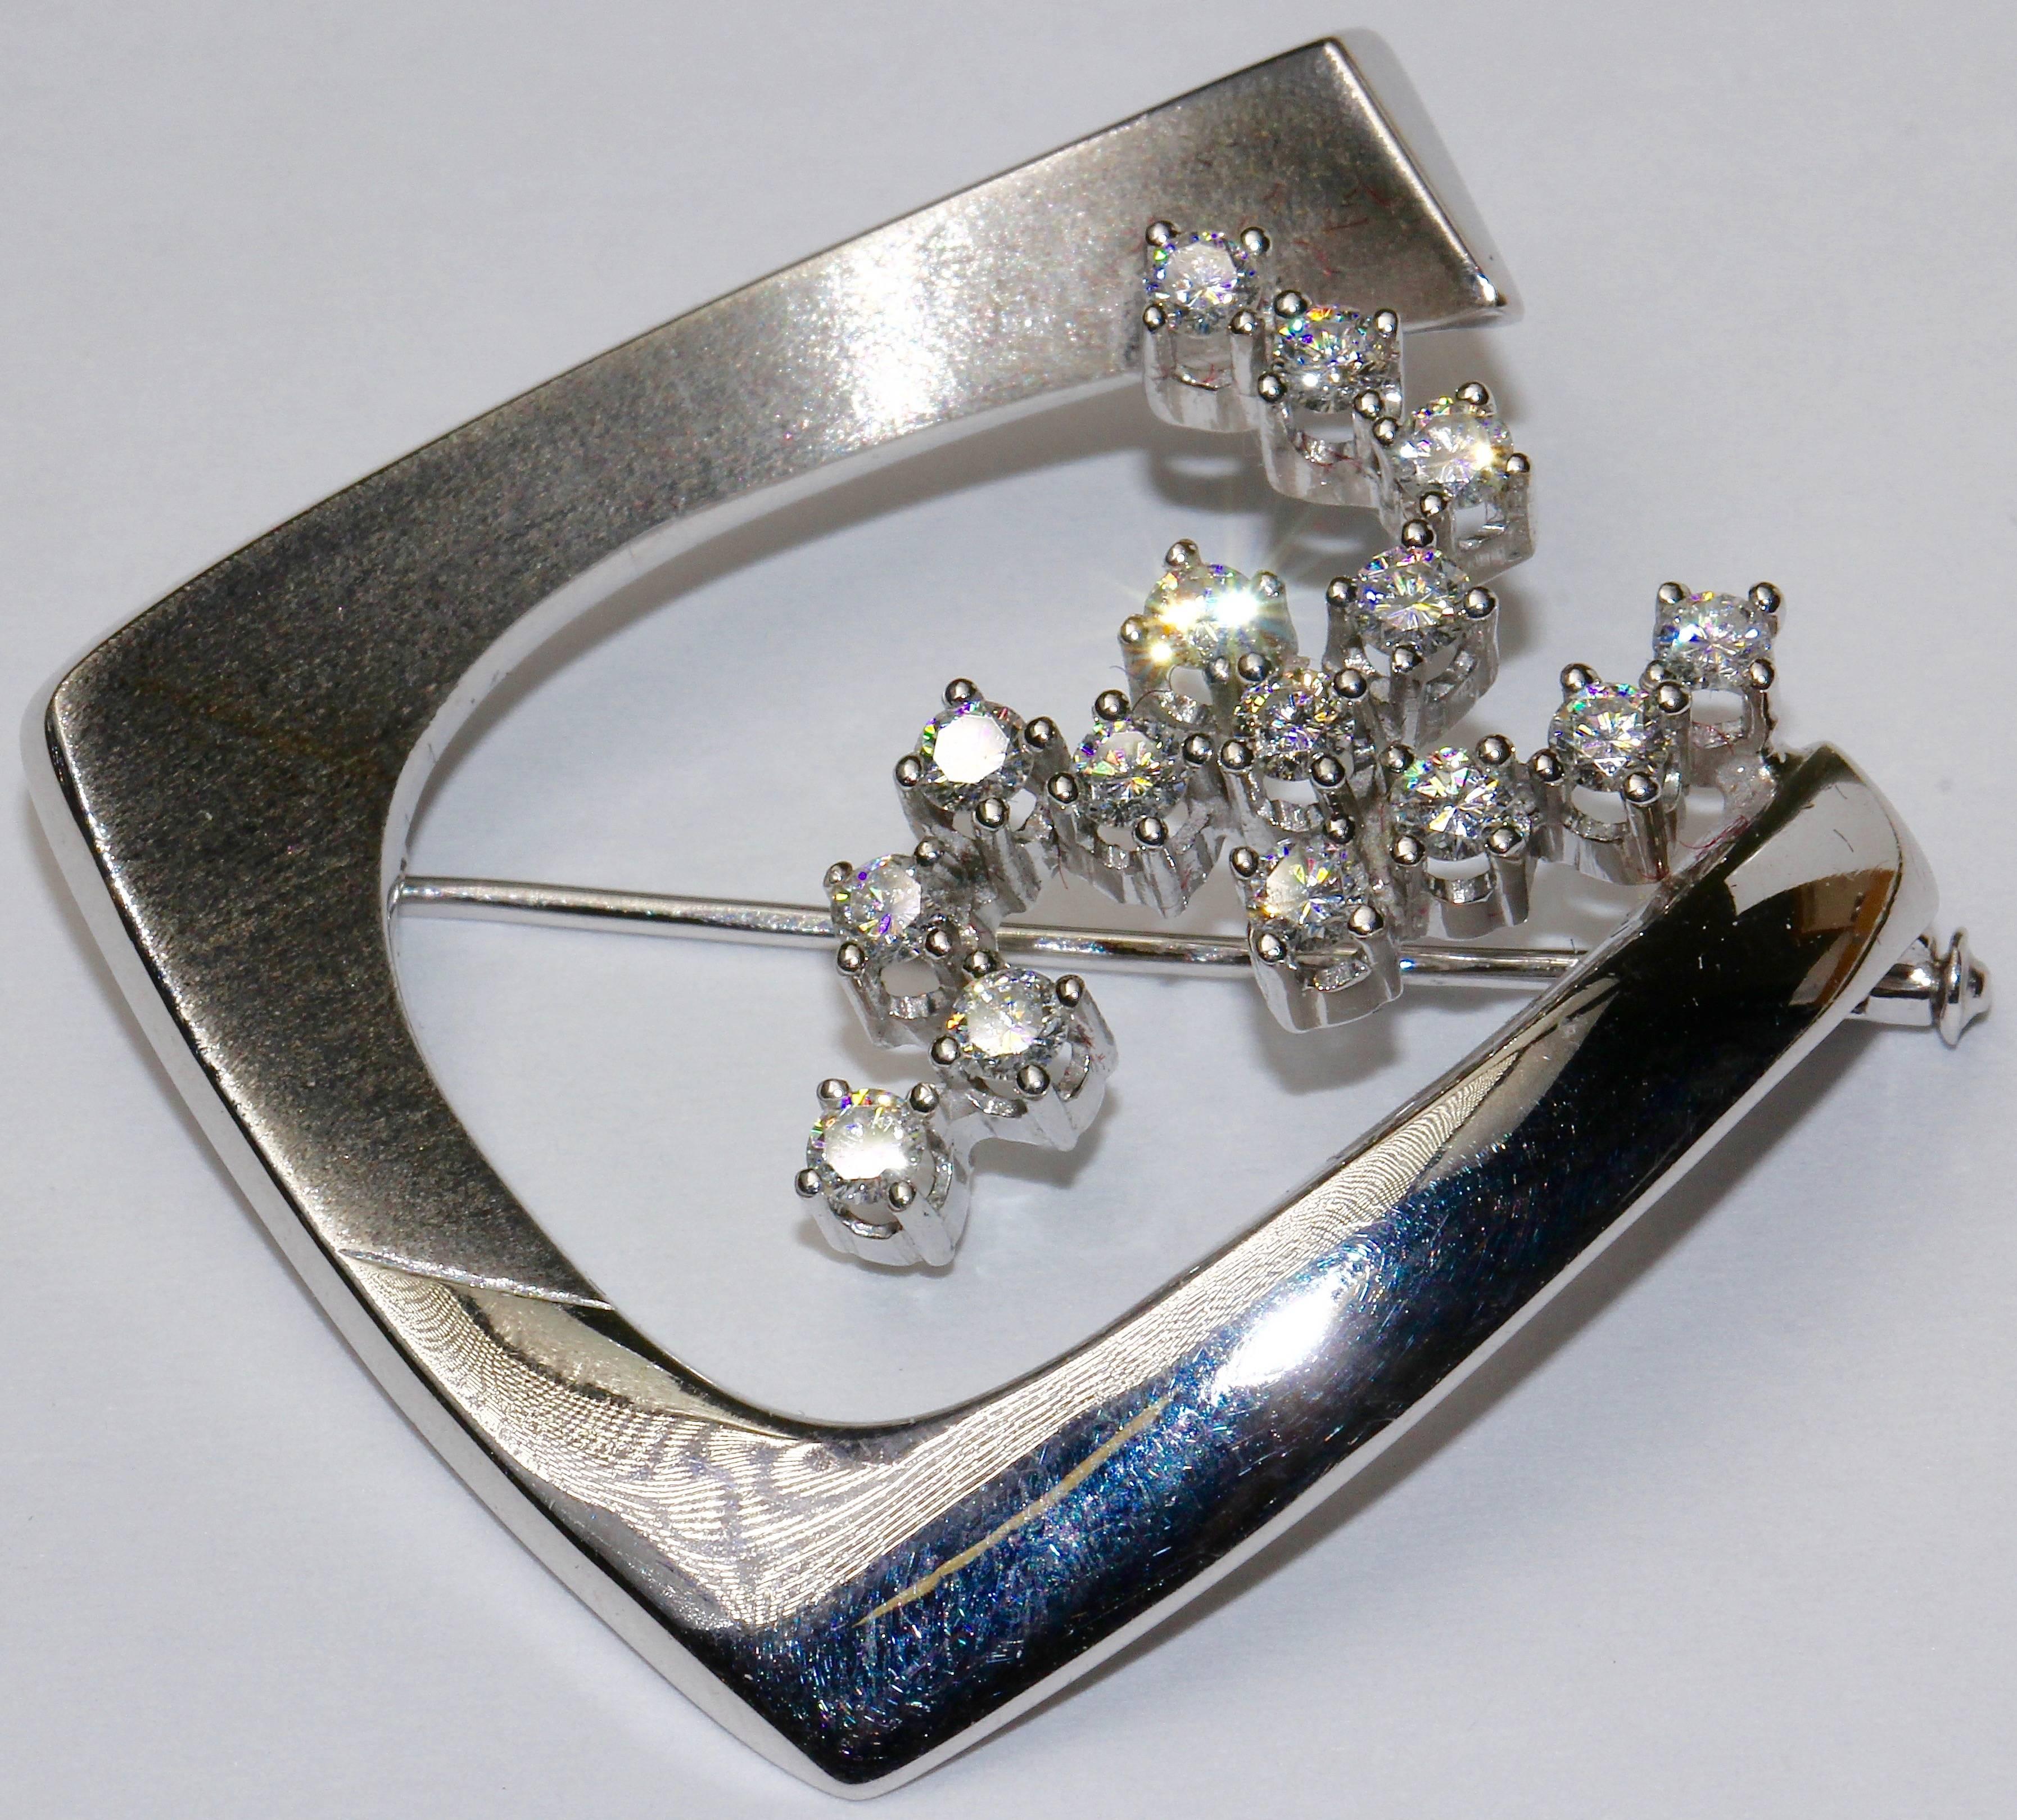 Stylish ladies white gold brooch set with 15 diamonds in TOP quality and a total weight of about one carat.
IF to VVS. White color.
Hallmarked.